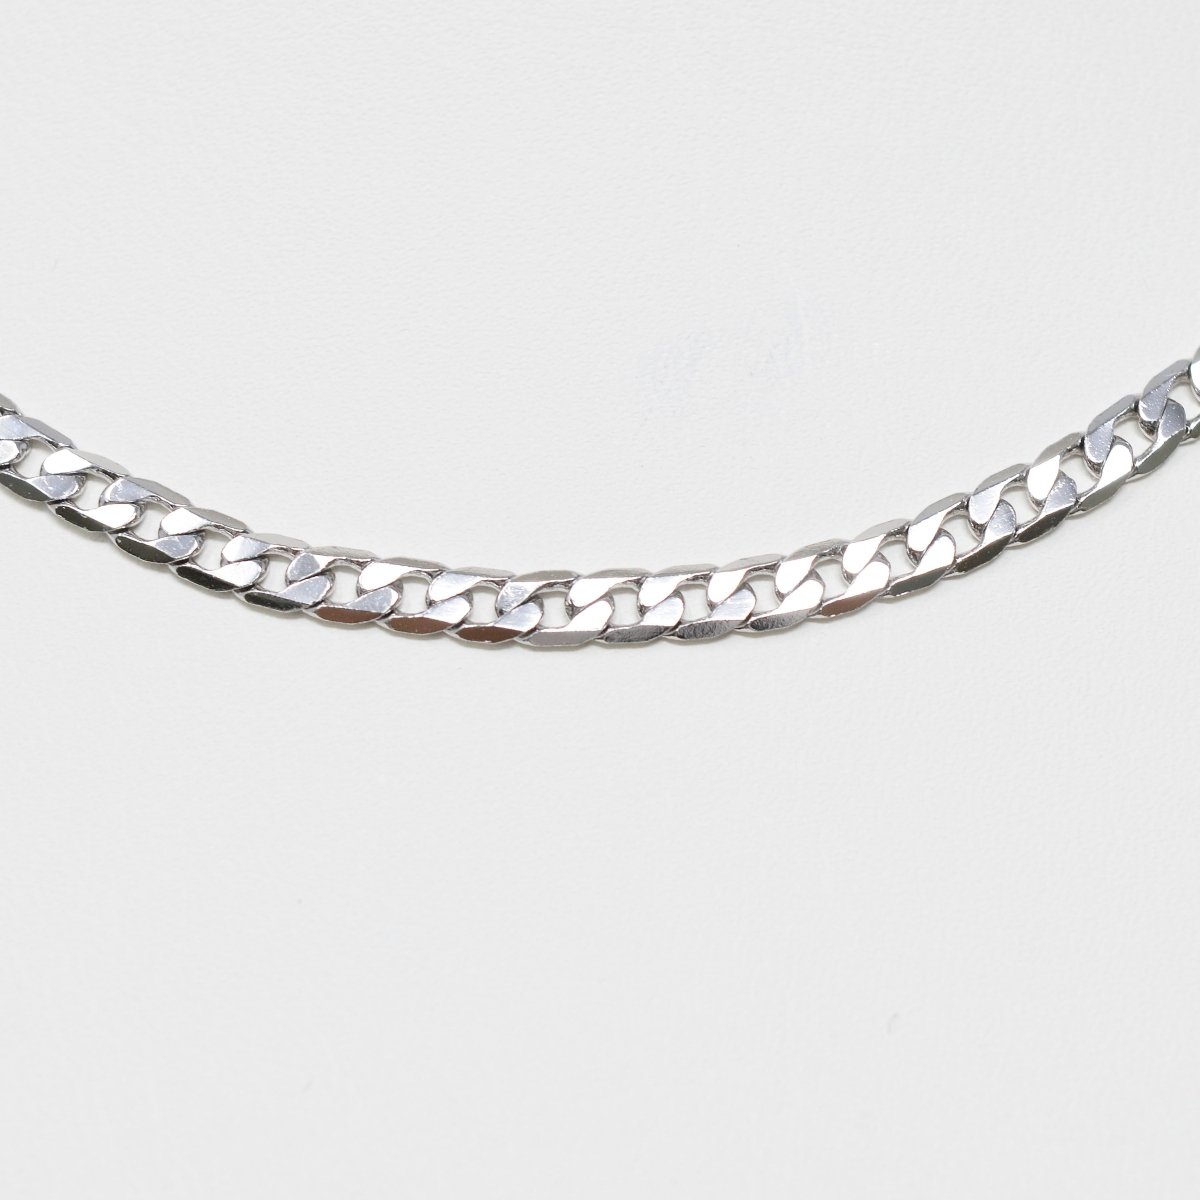 Silver Curb Flat Oval Smooth White gold Filled Chain 17.7" inch 3mm Tarnish Resistant Finished Chain for Jewelry Making and Craft Supplies | CN-1010 Clearance Pricing - DLUXCA